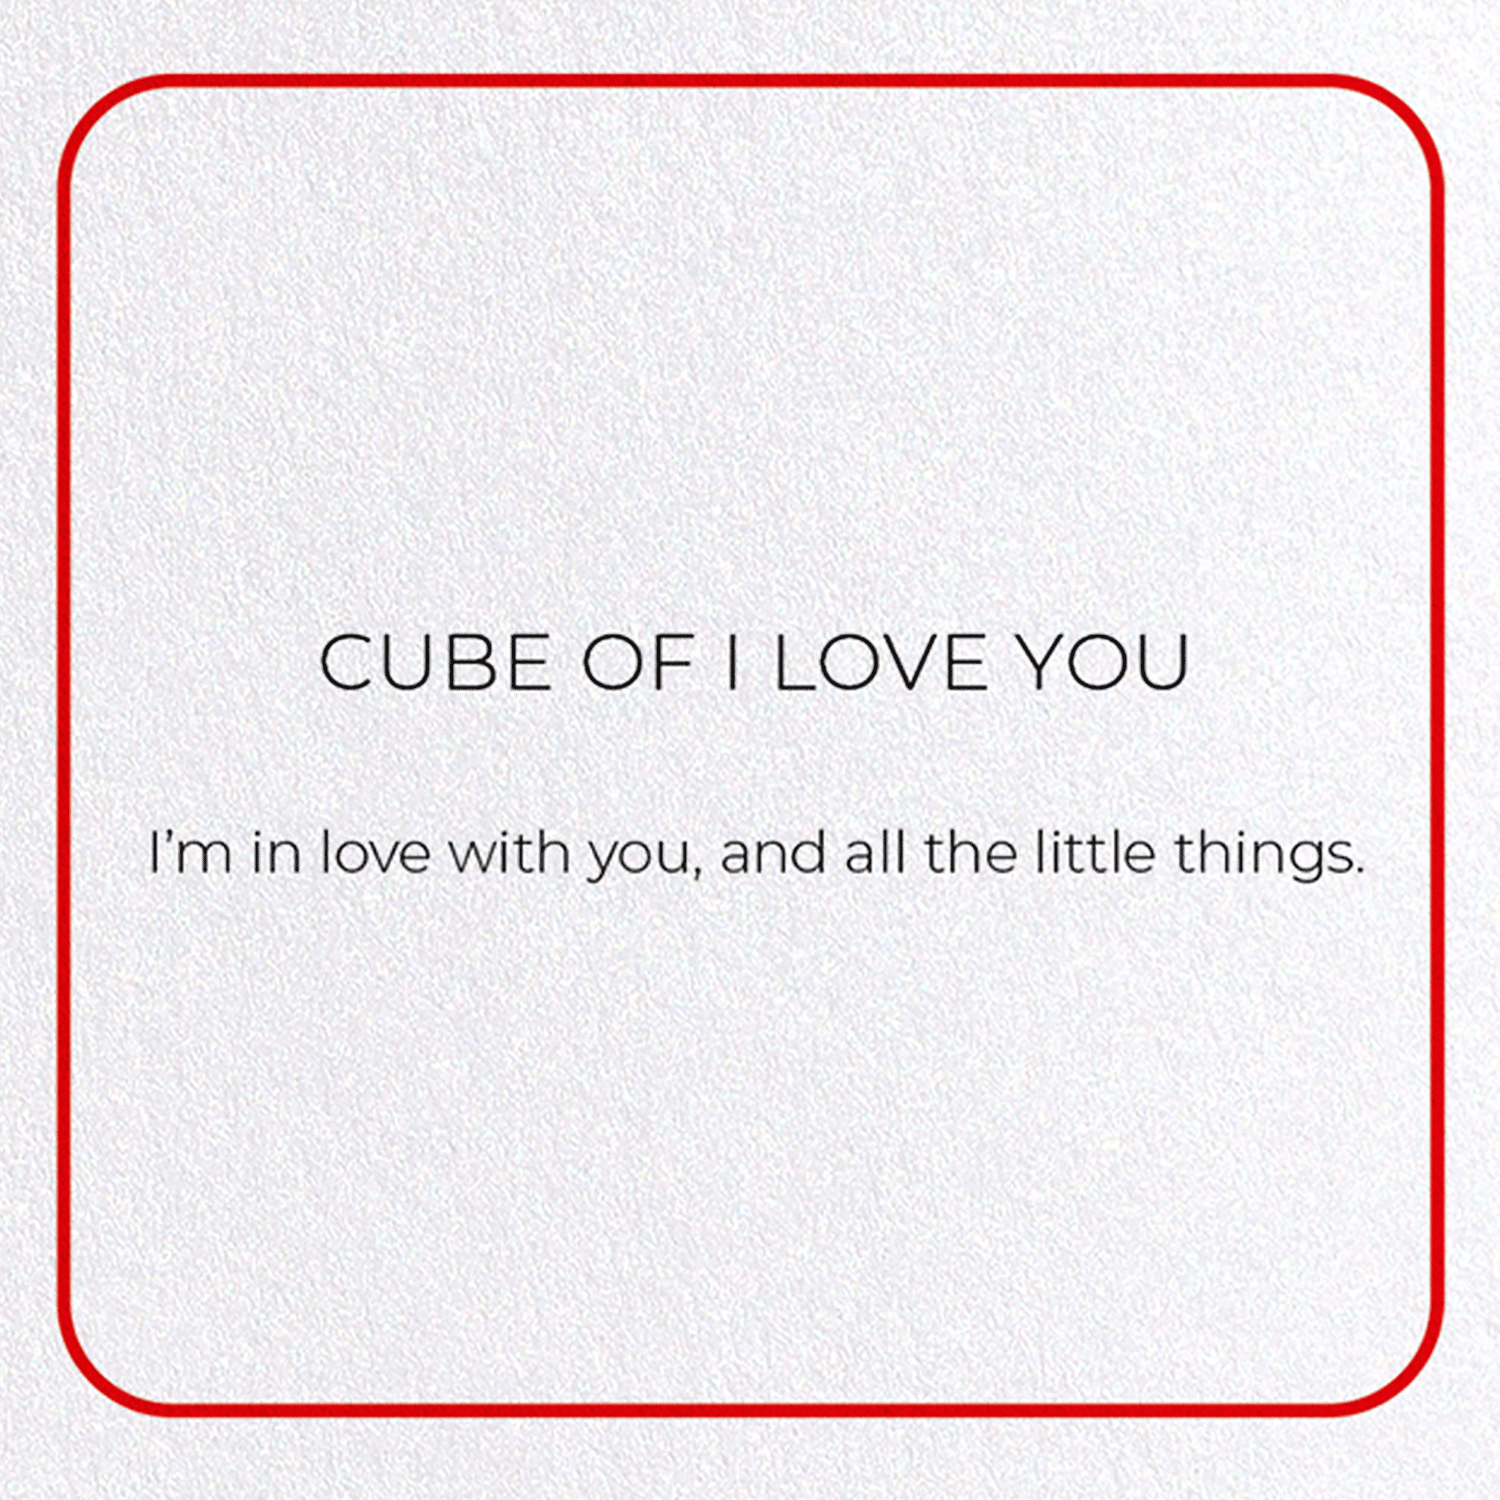 CUBE OF I LOVE YOU: Photo Greeting Card